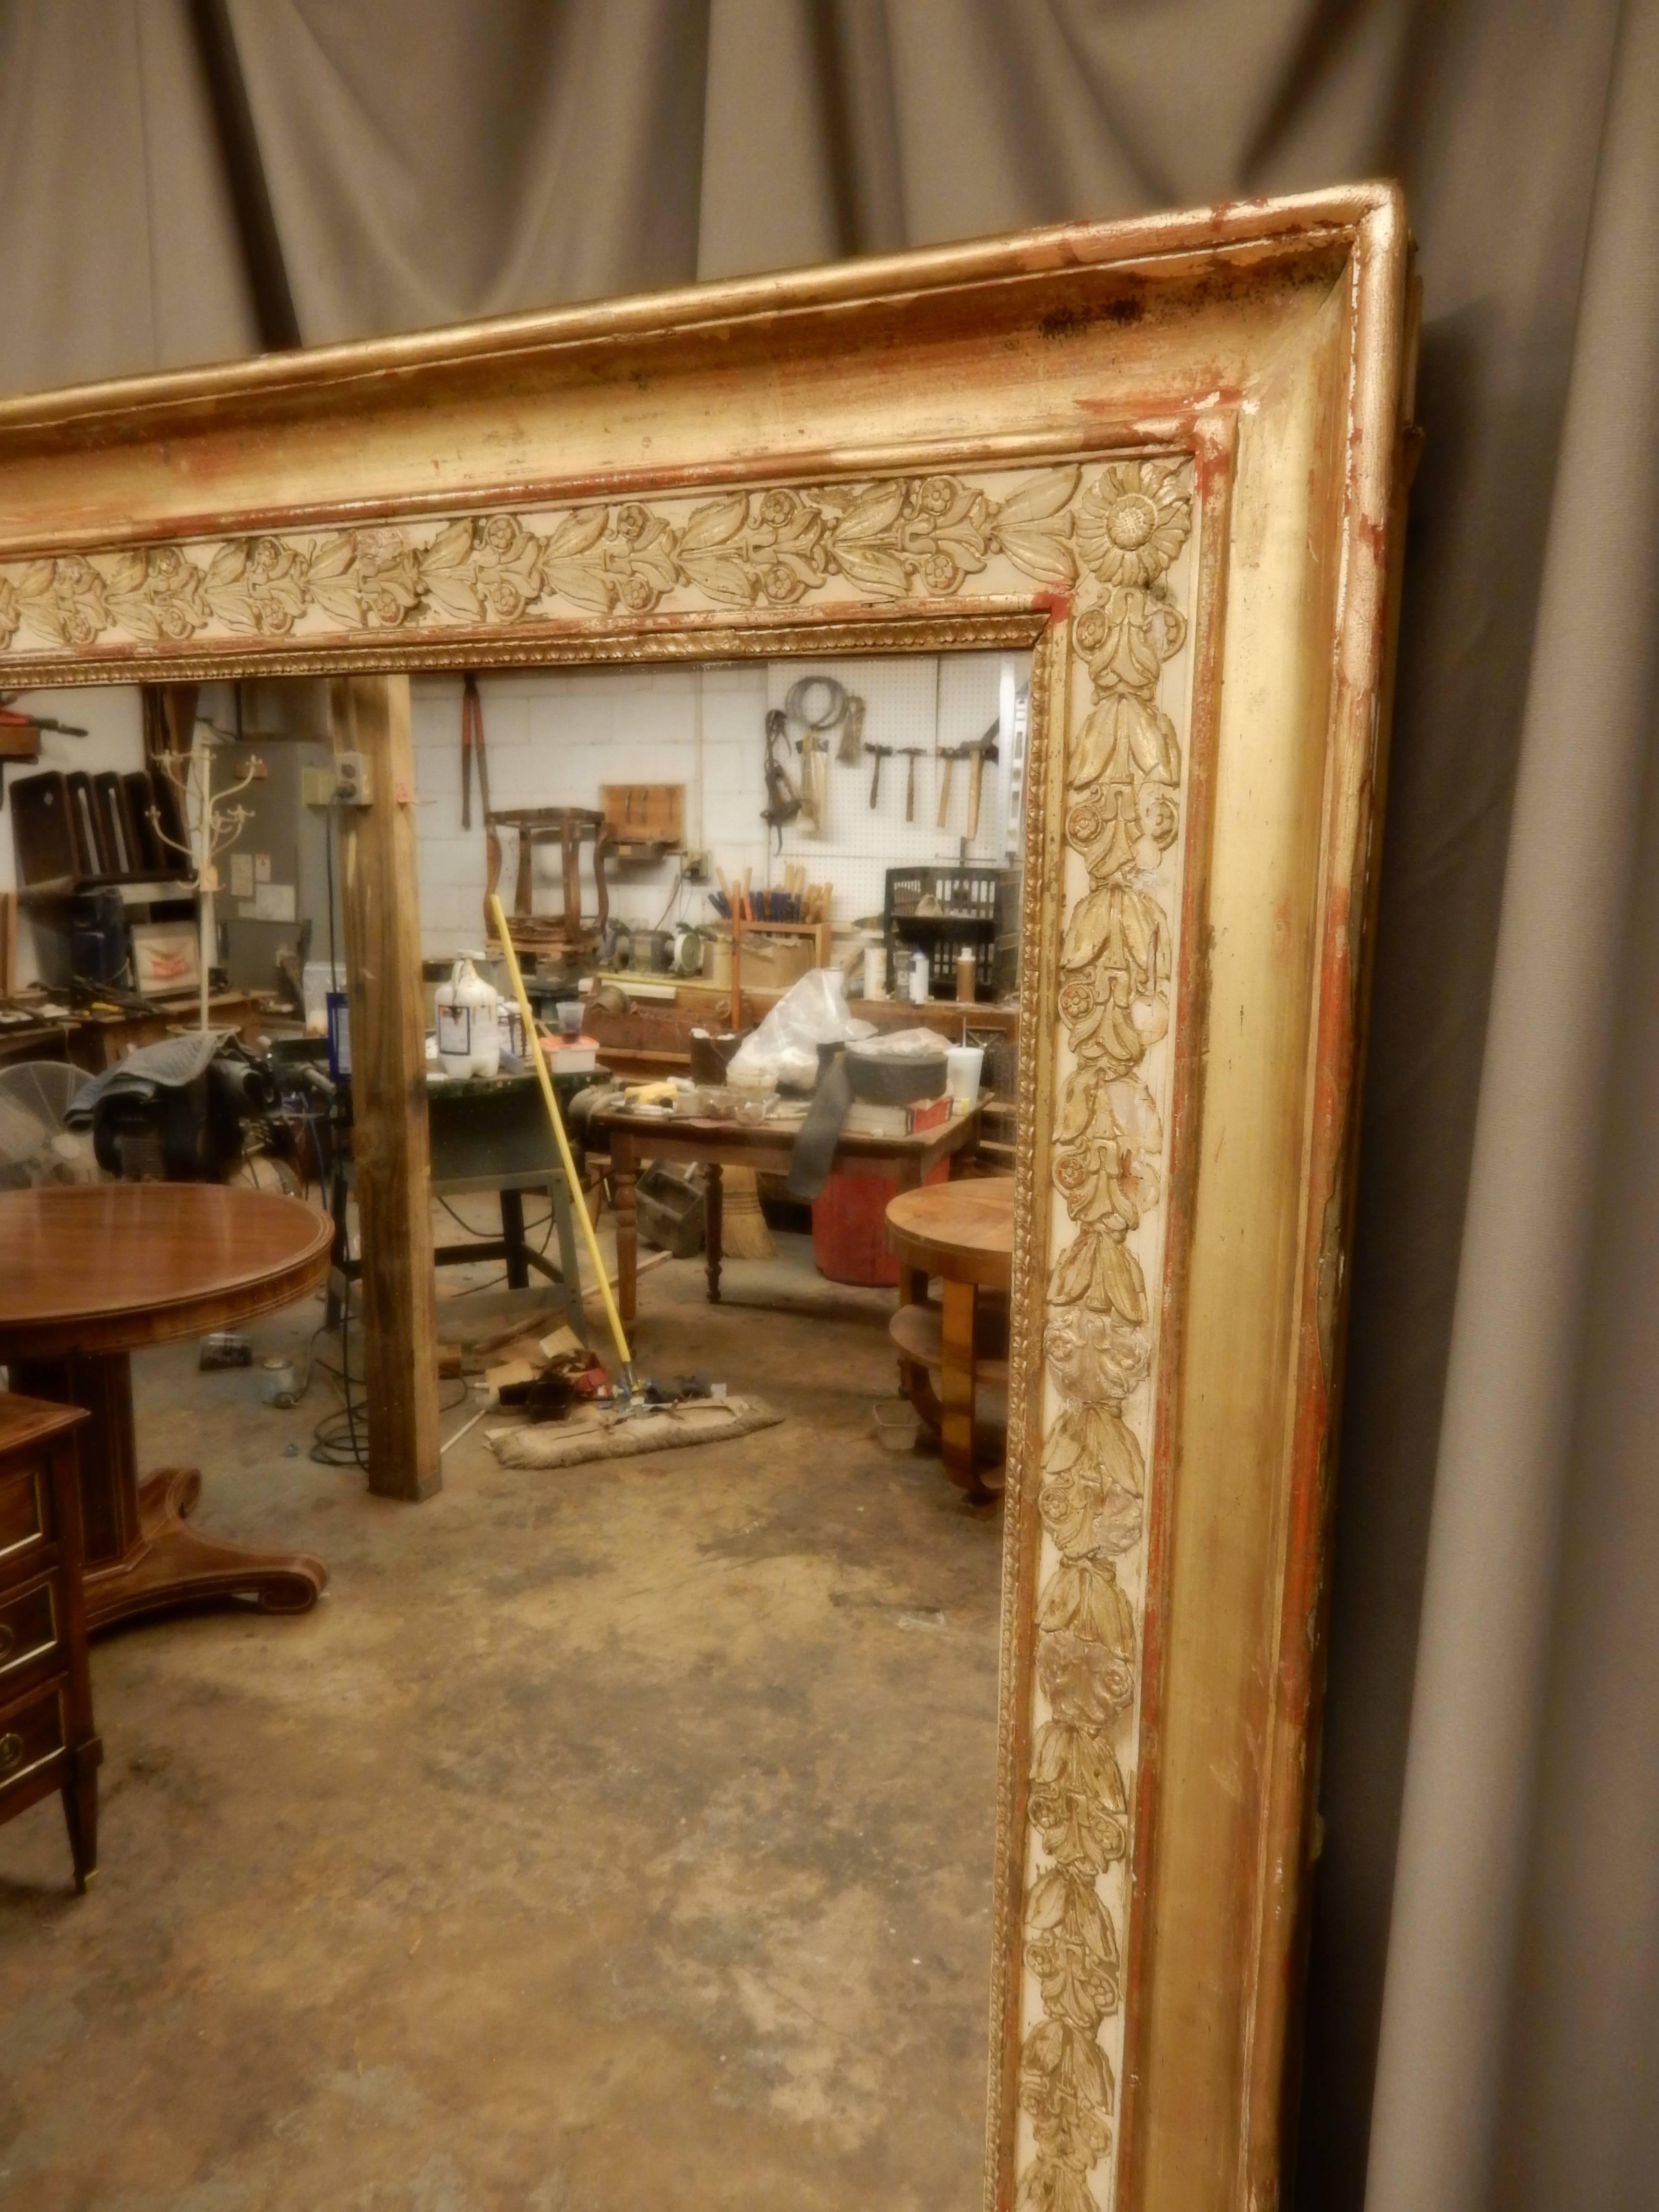 Beautiful gilt early 19th century French mirror. Very delicate plaster relief decoration around frame. Mirror has been replaced sometime in the past.